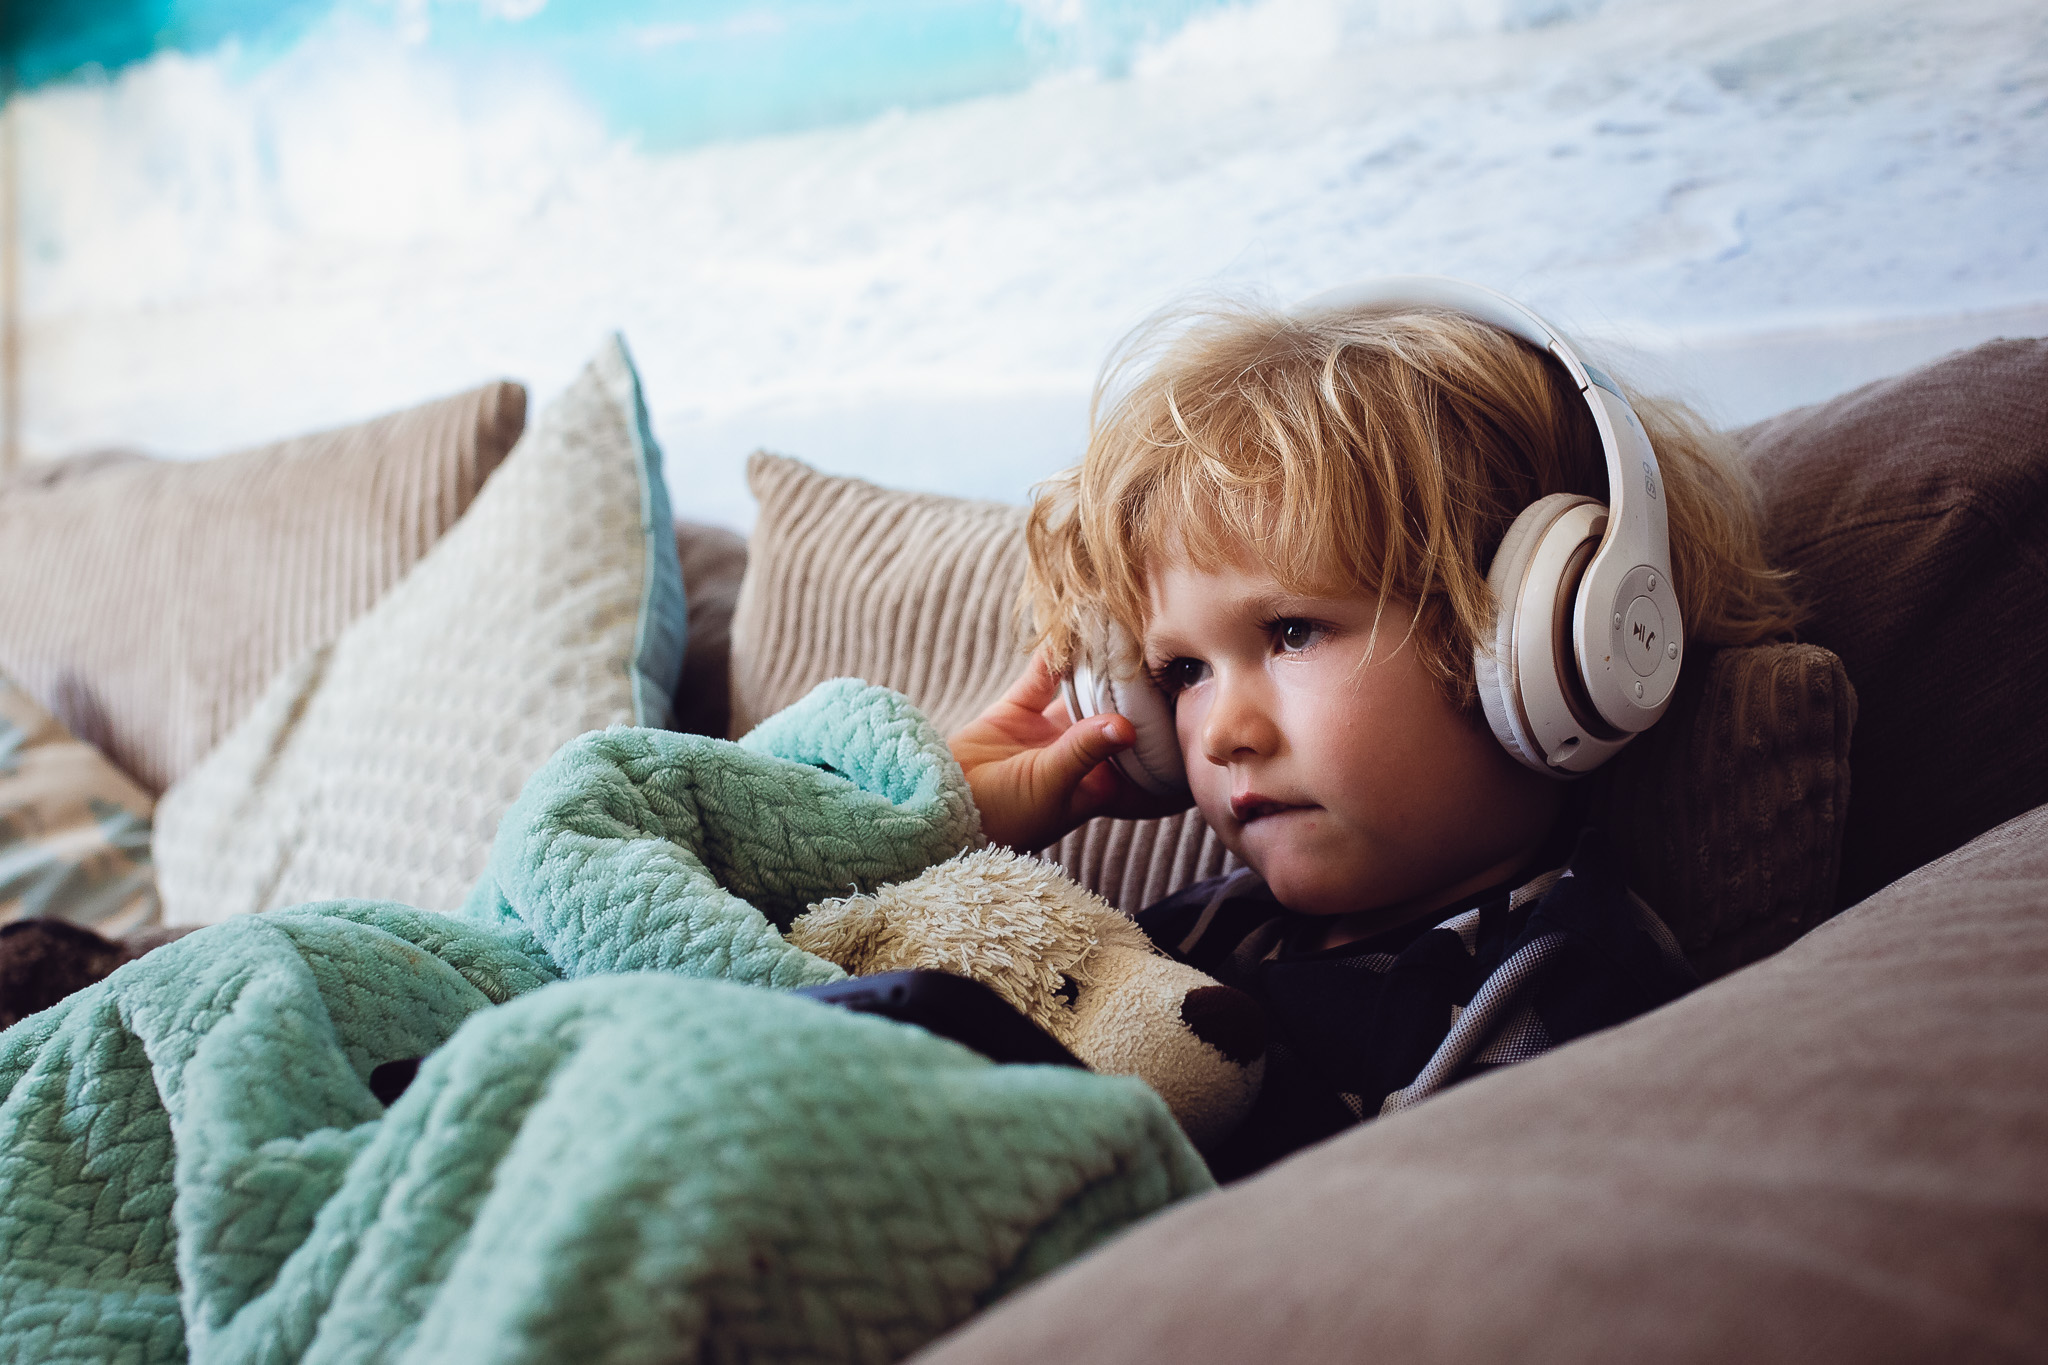 Kai sitting on a sofa under a blanket wearing headphones during a family photo session